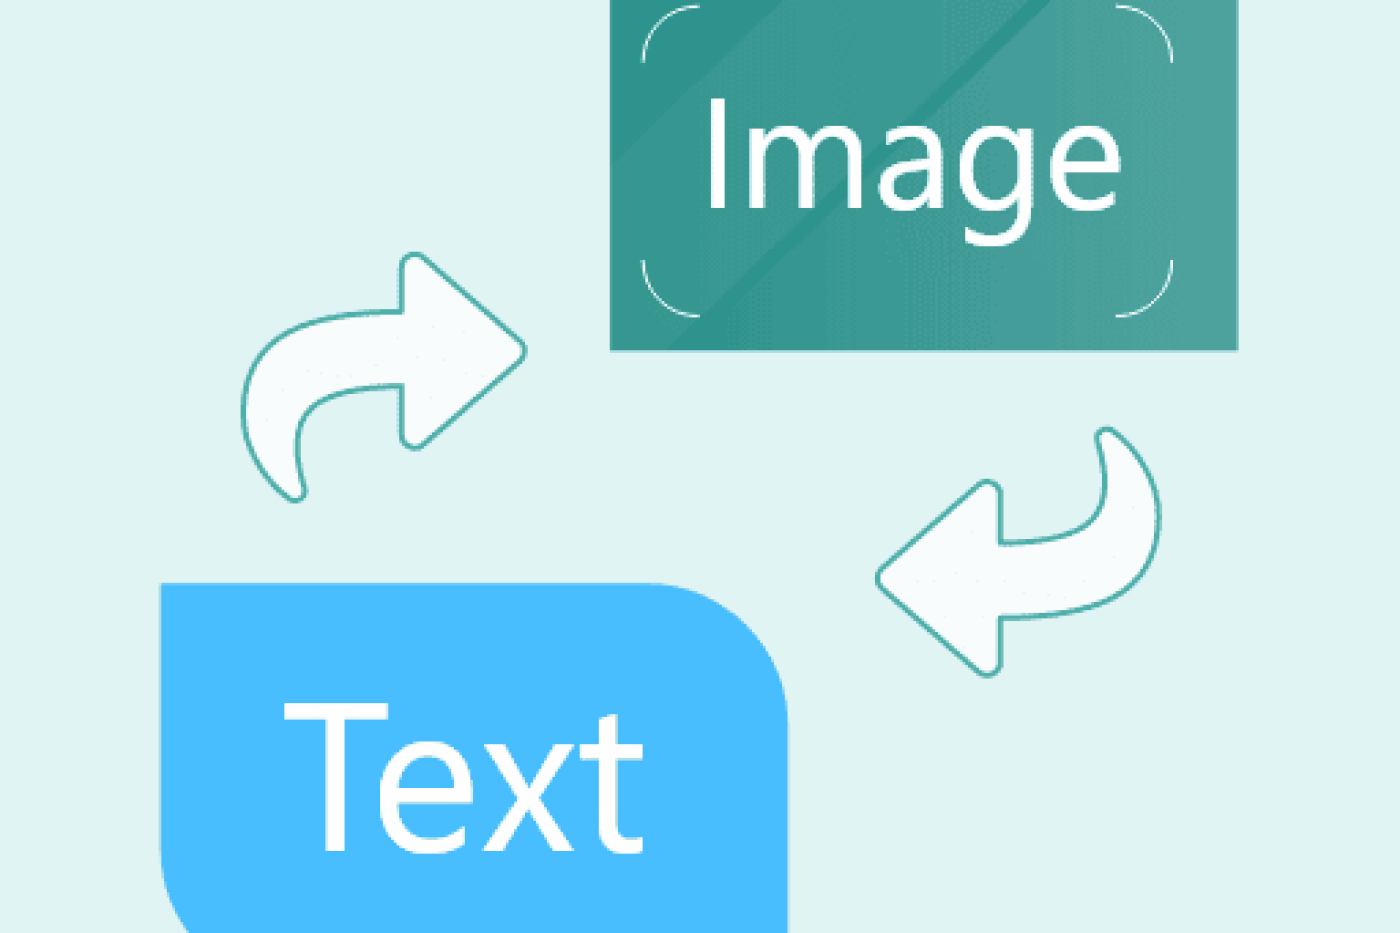 text-to-image